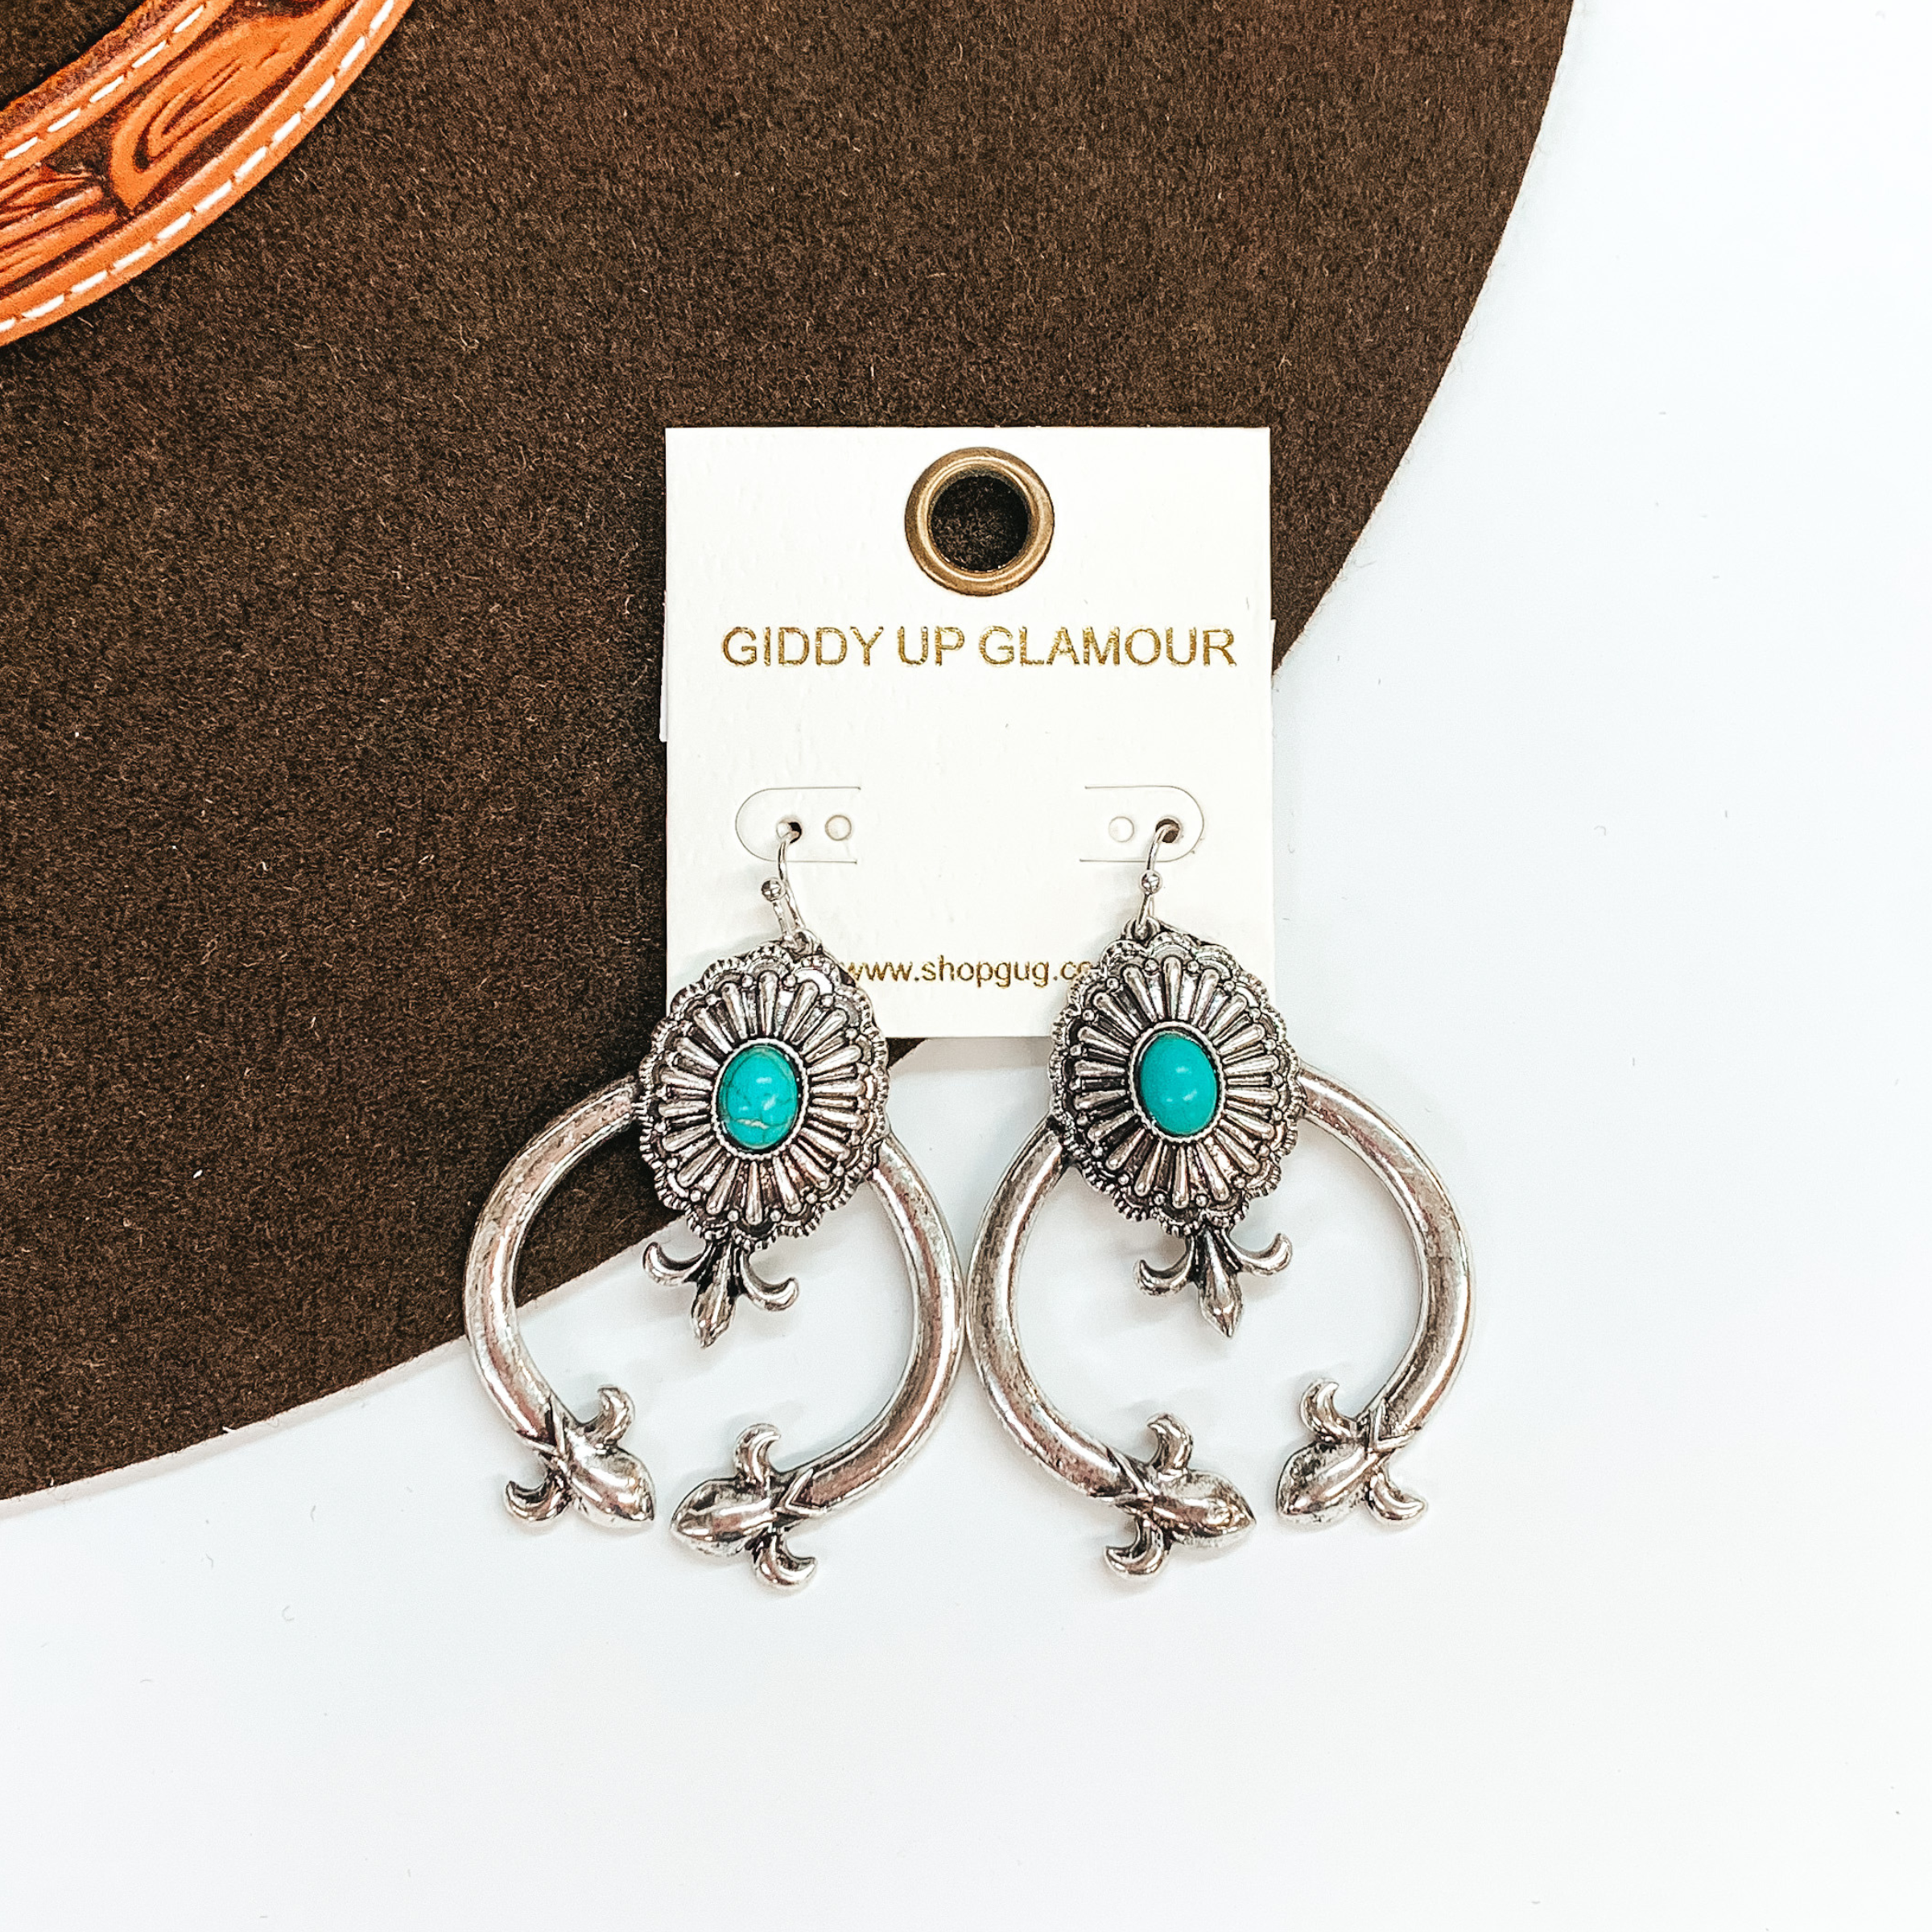 These are silver squash blossom earrings with a concho in the center and  a small oval faux stone in turquoise. The squash blossom have pointy ends and under the concho. These earrings are taken laying on a dark brown  brim hat and on a white background.